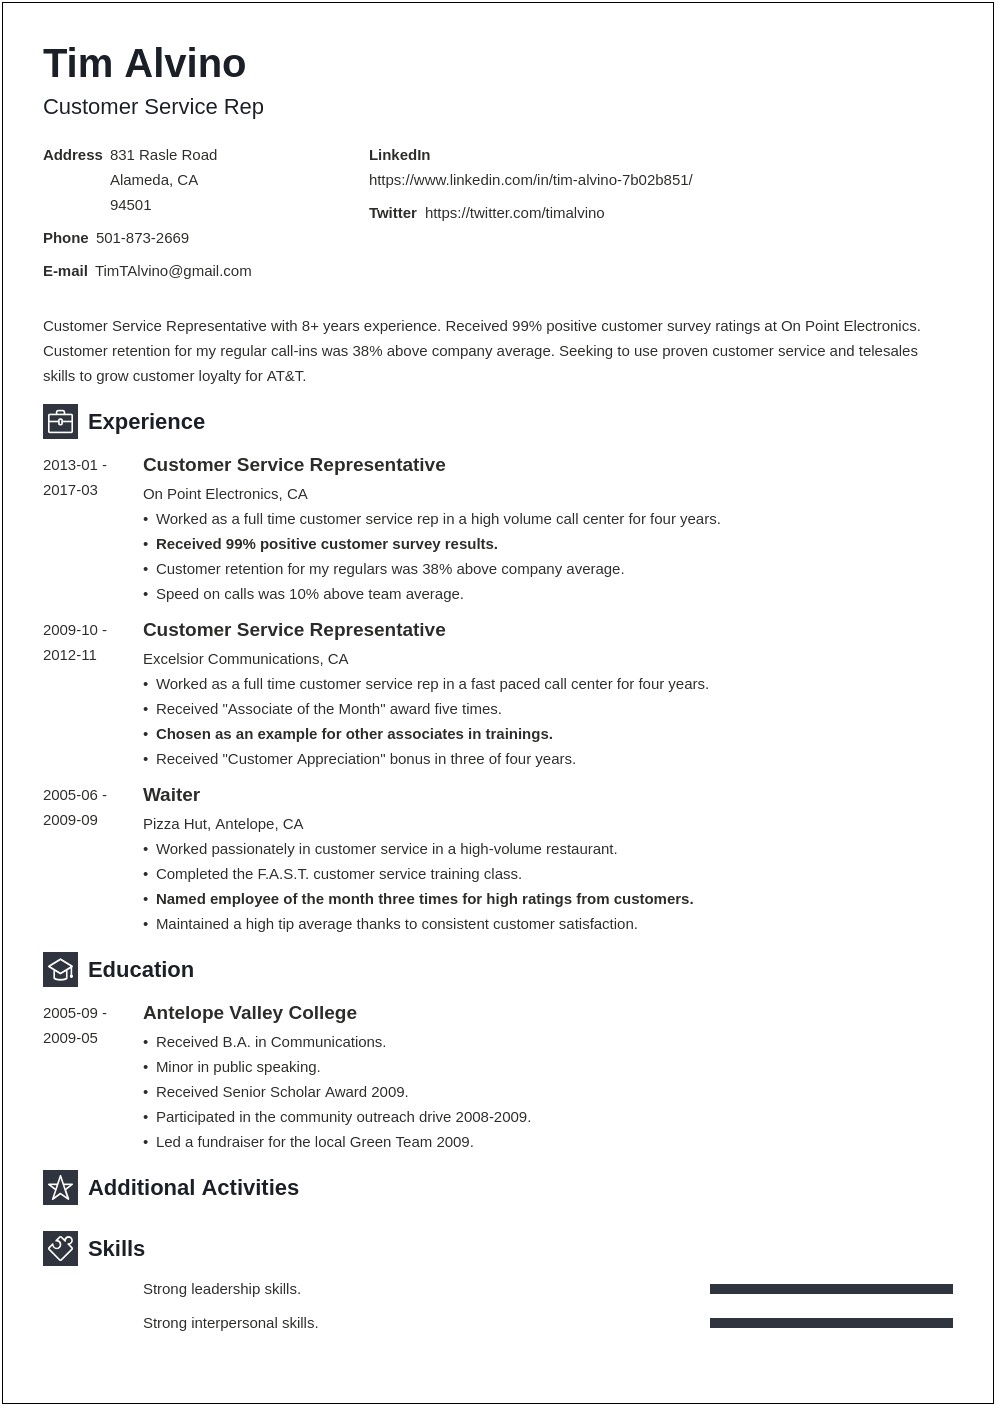 Resume Opening Statement Examples Customer Service